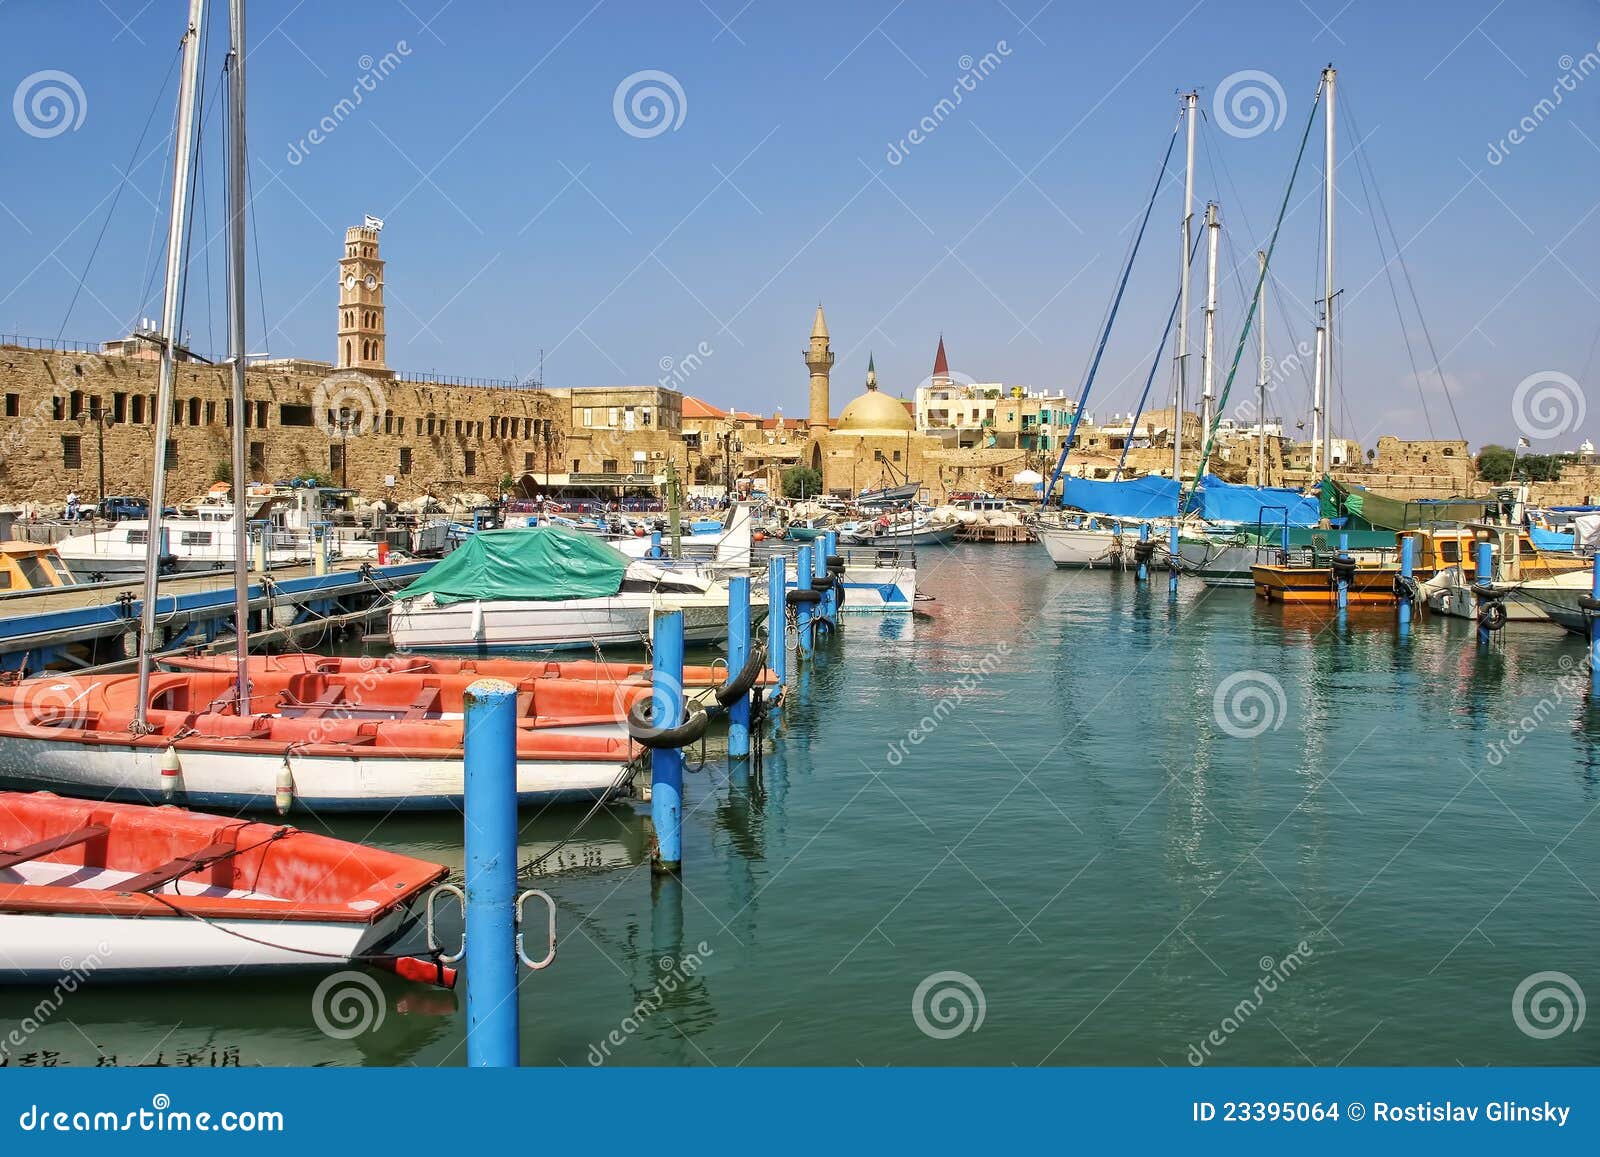 old harbor in acre, israel.